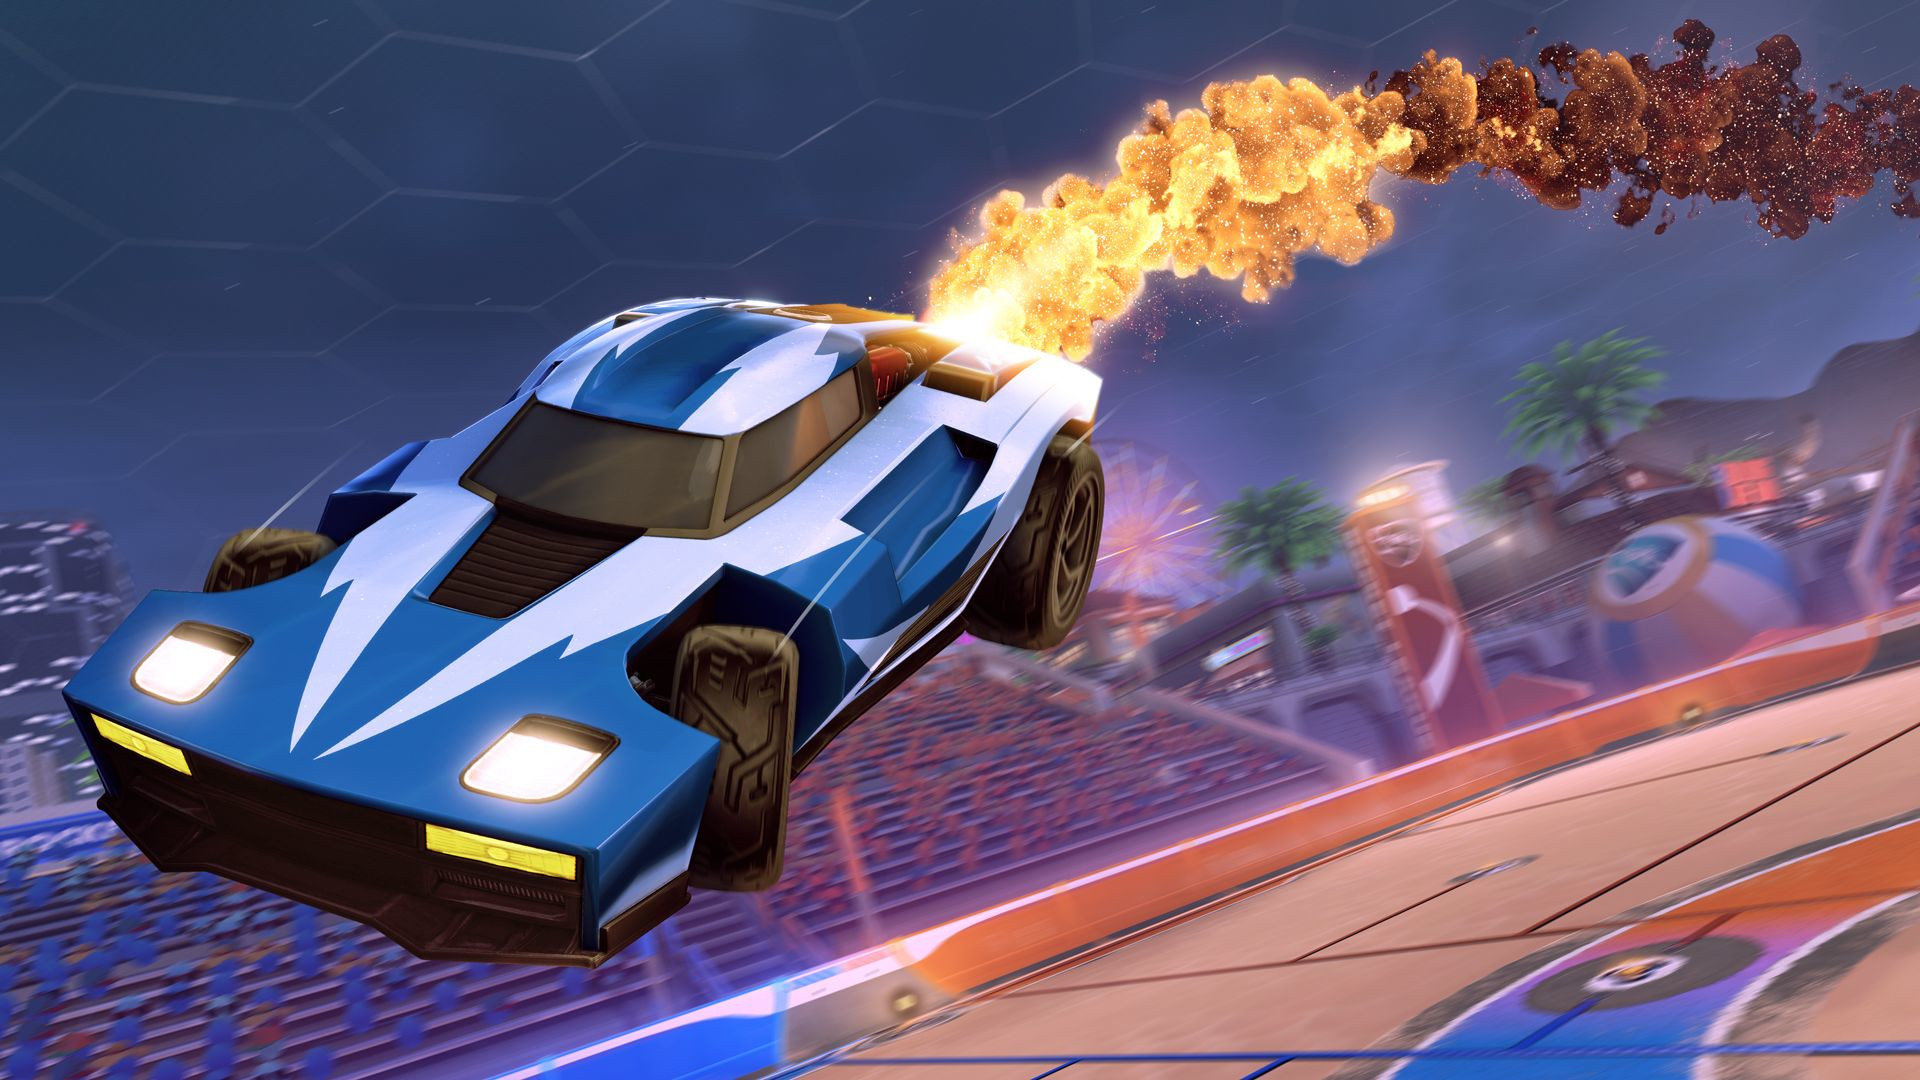 Rocket League trading: how to set up the best trades